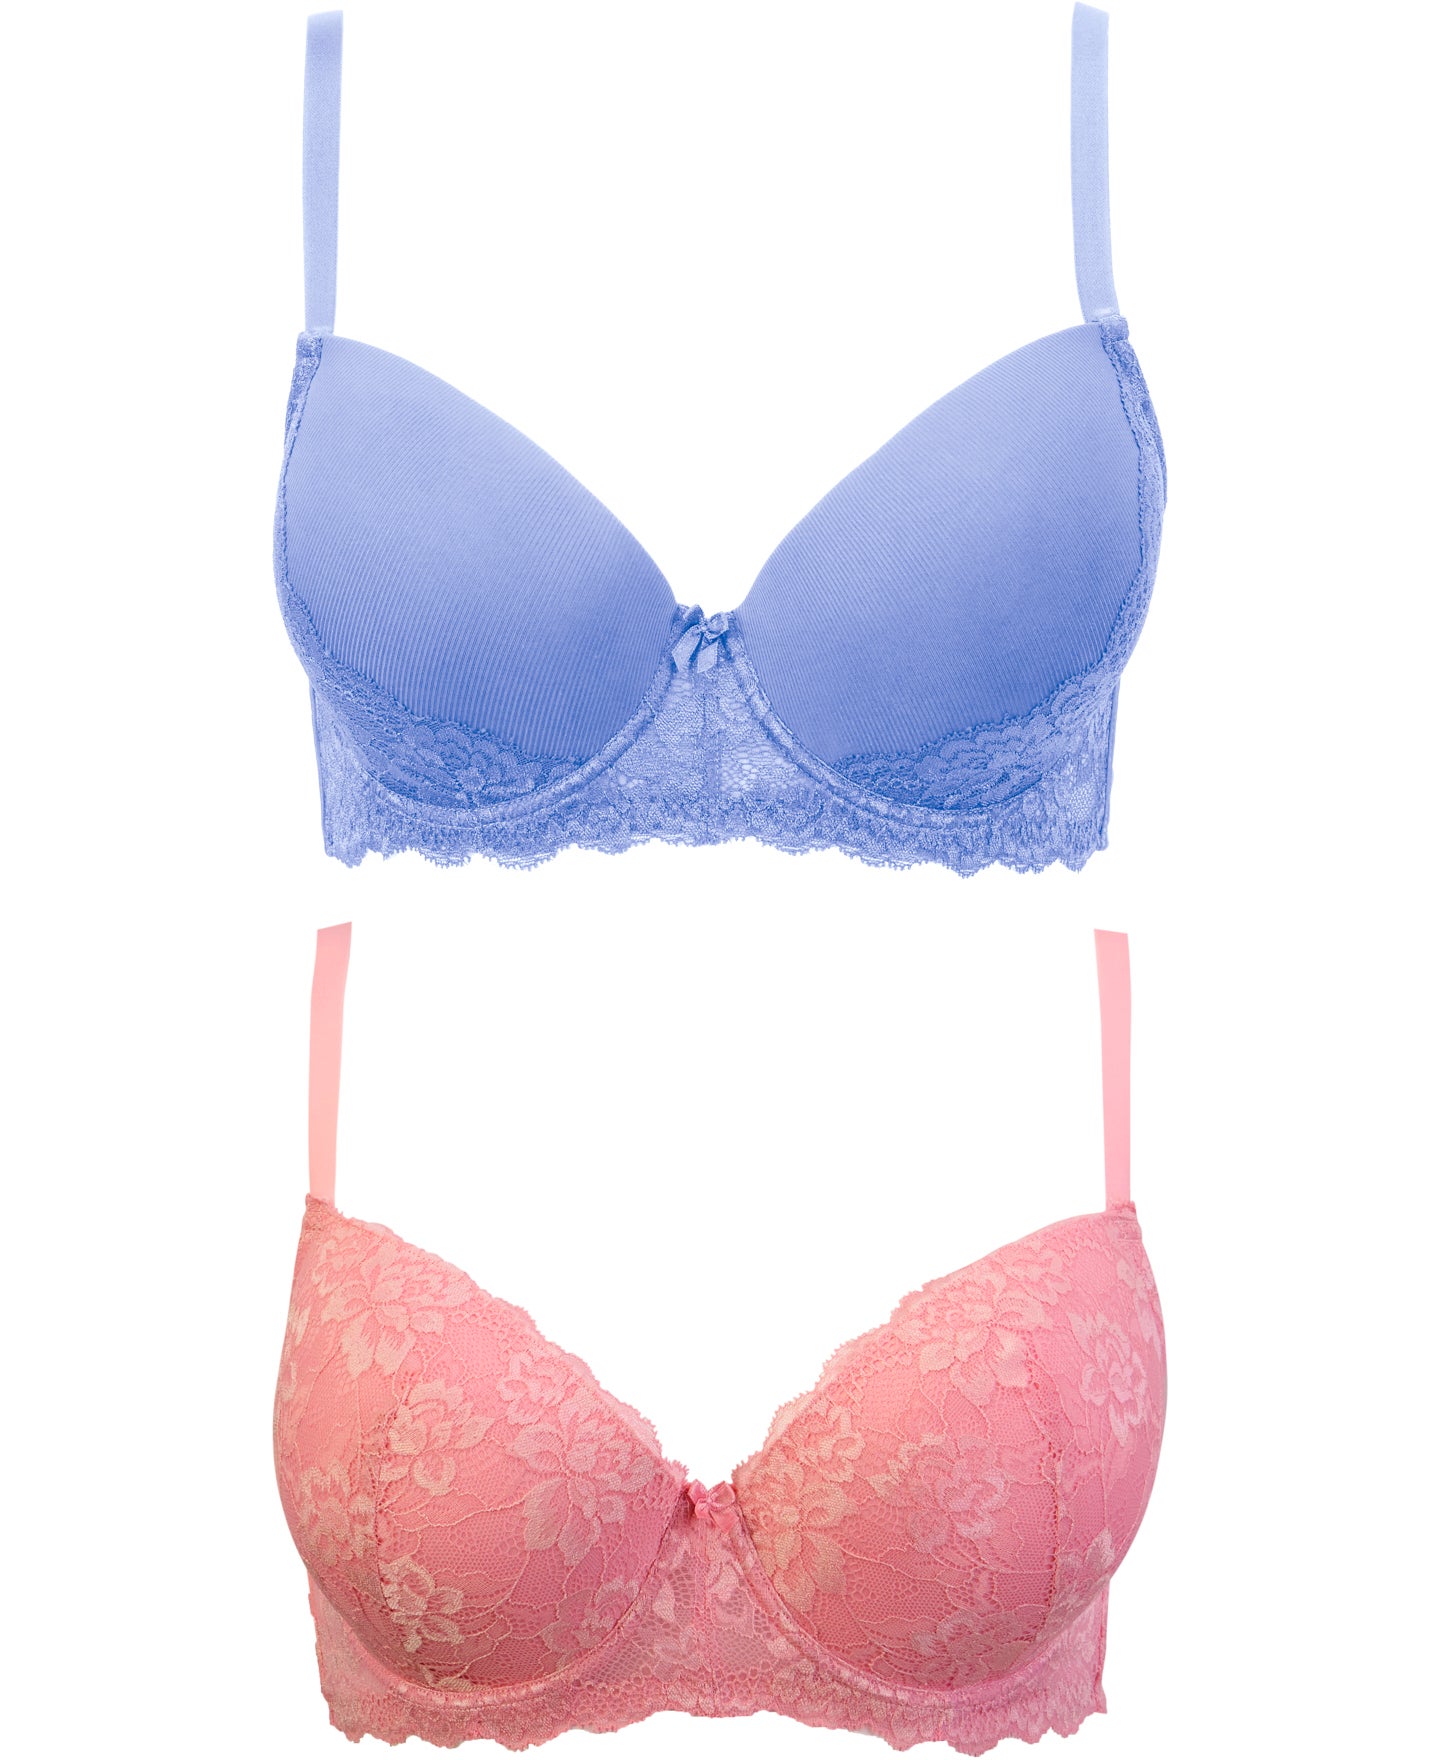 Shyle Cerulean Blue Rose Print Push Up Bra With Pleated Cups - 40B